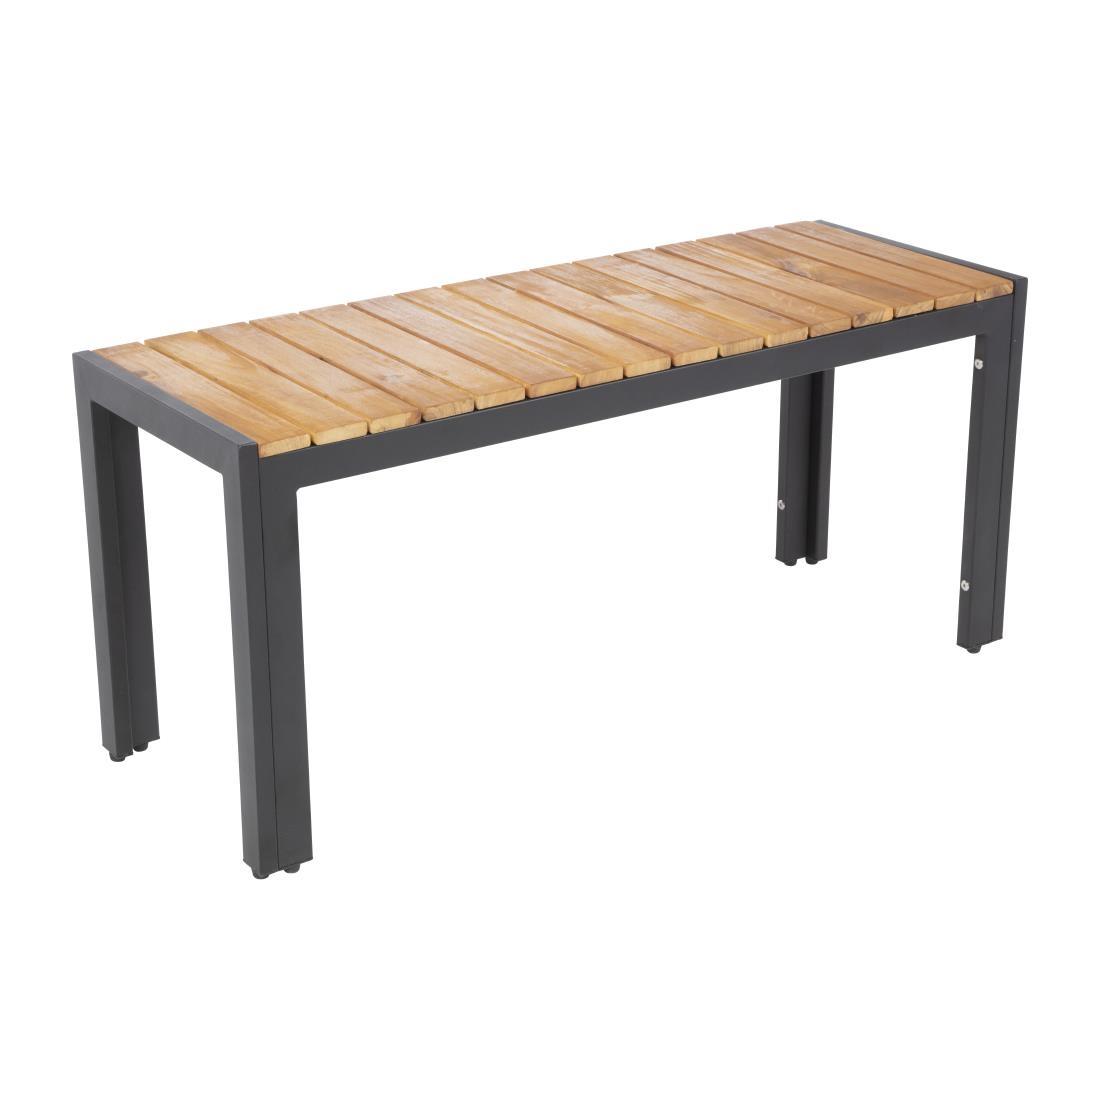 Bolero Rectangular Steel and Acacia Benches 1000mm (Pack of 2) - DS154  - 4